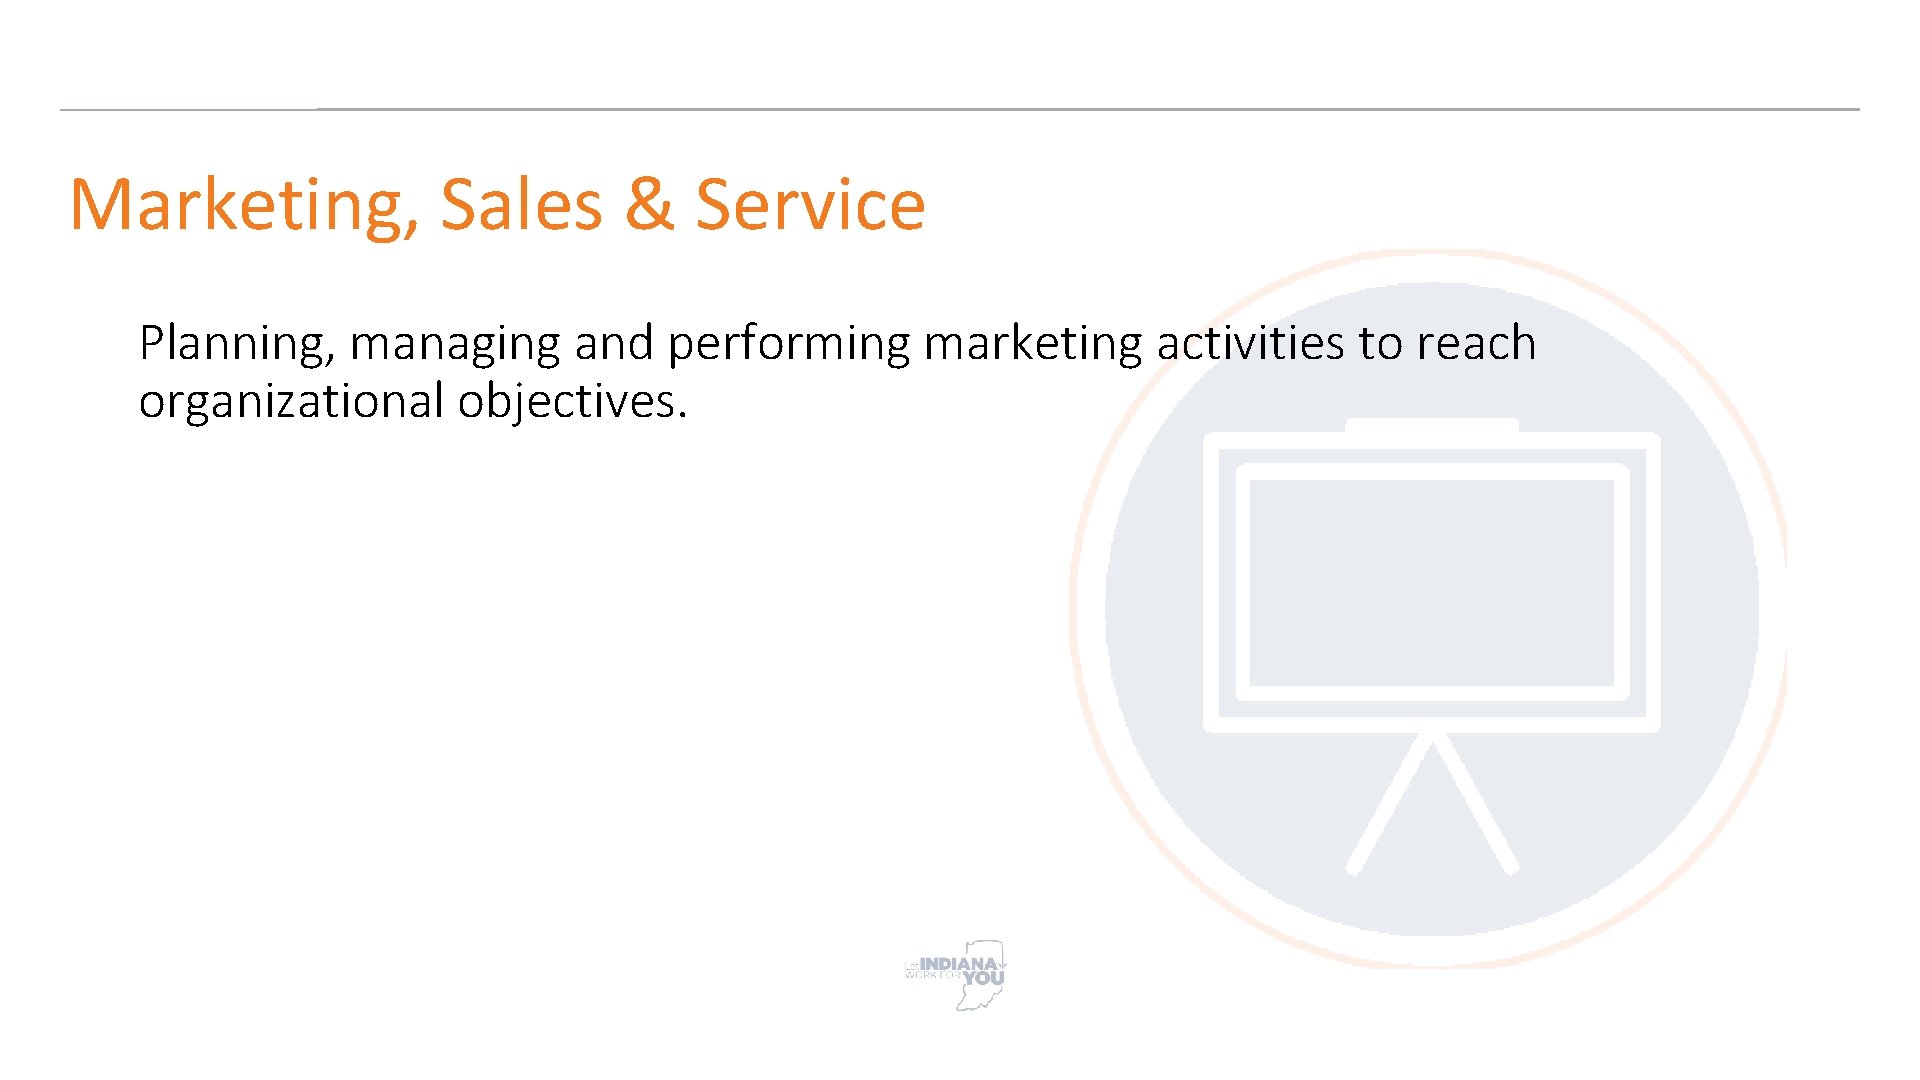 Marketing, Sales & Service Planning, managing and performing marketing activities to reach organizational objectives.